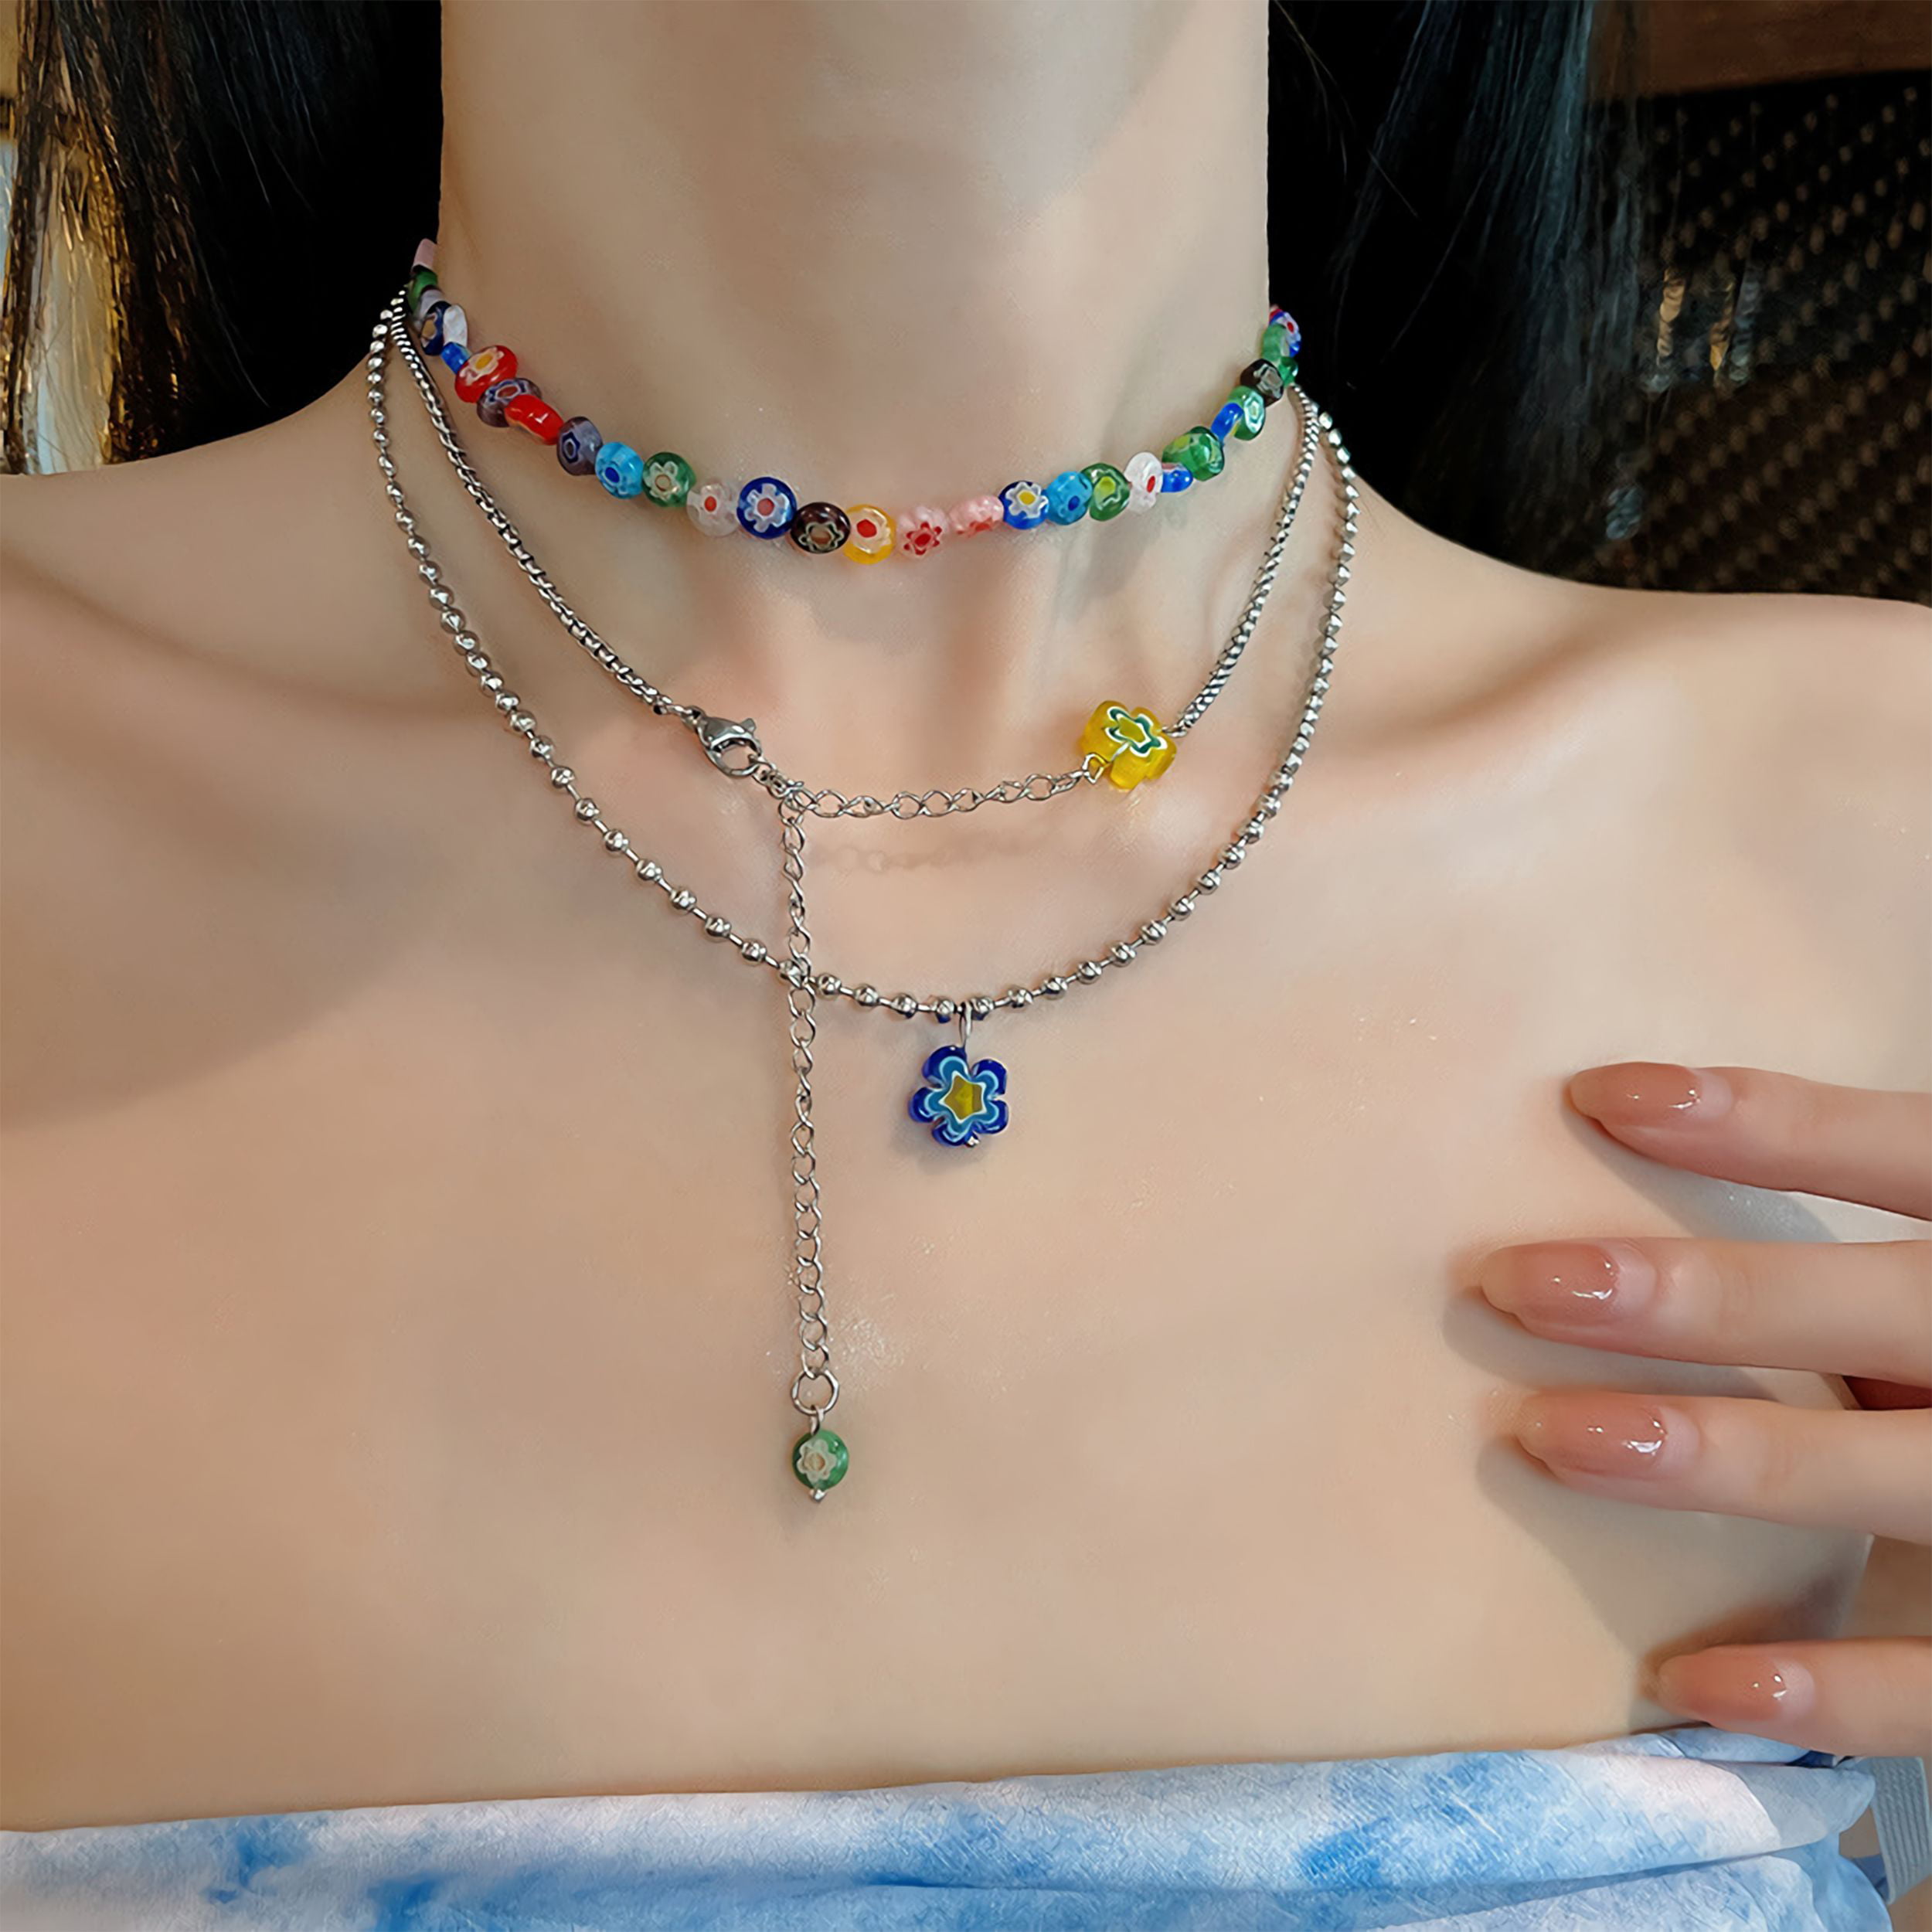 Women Girls Y2k Necklace Layered Colorful Beaded Choker Chain Necklace  Bohemia | eBay